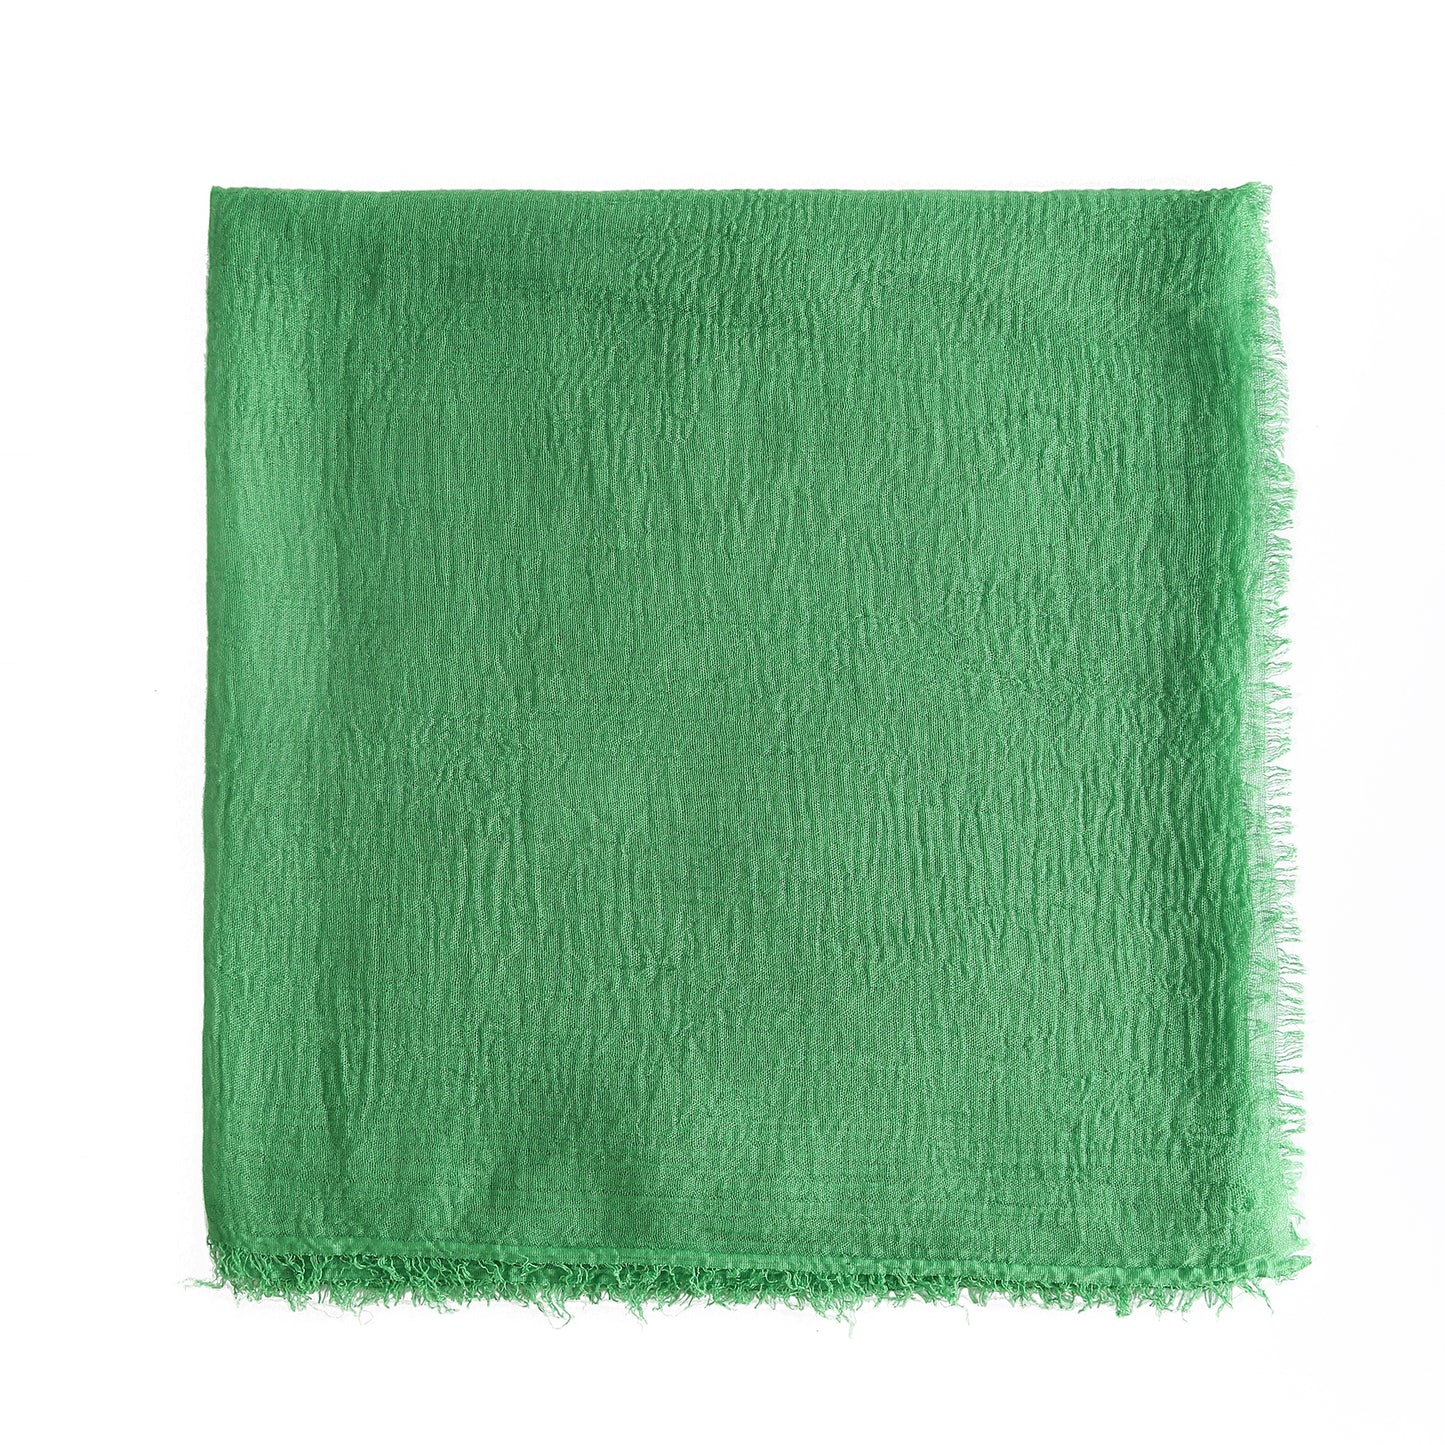 The all time essential scarf appelgroen